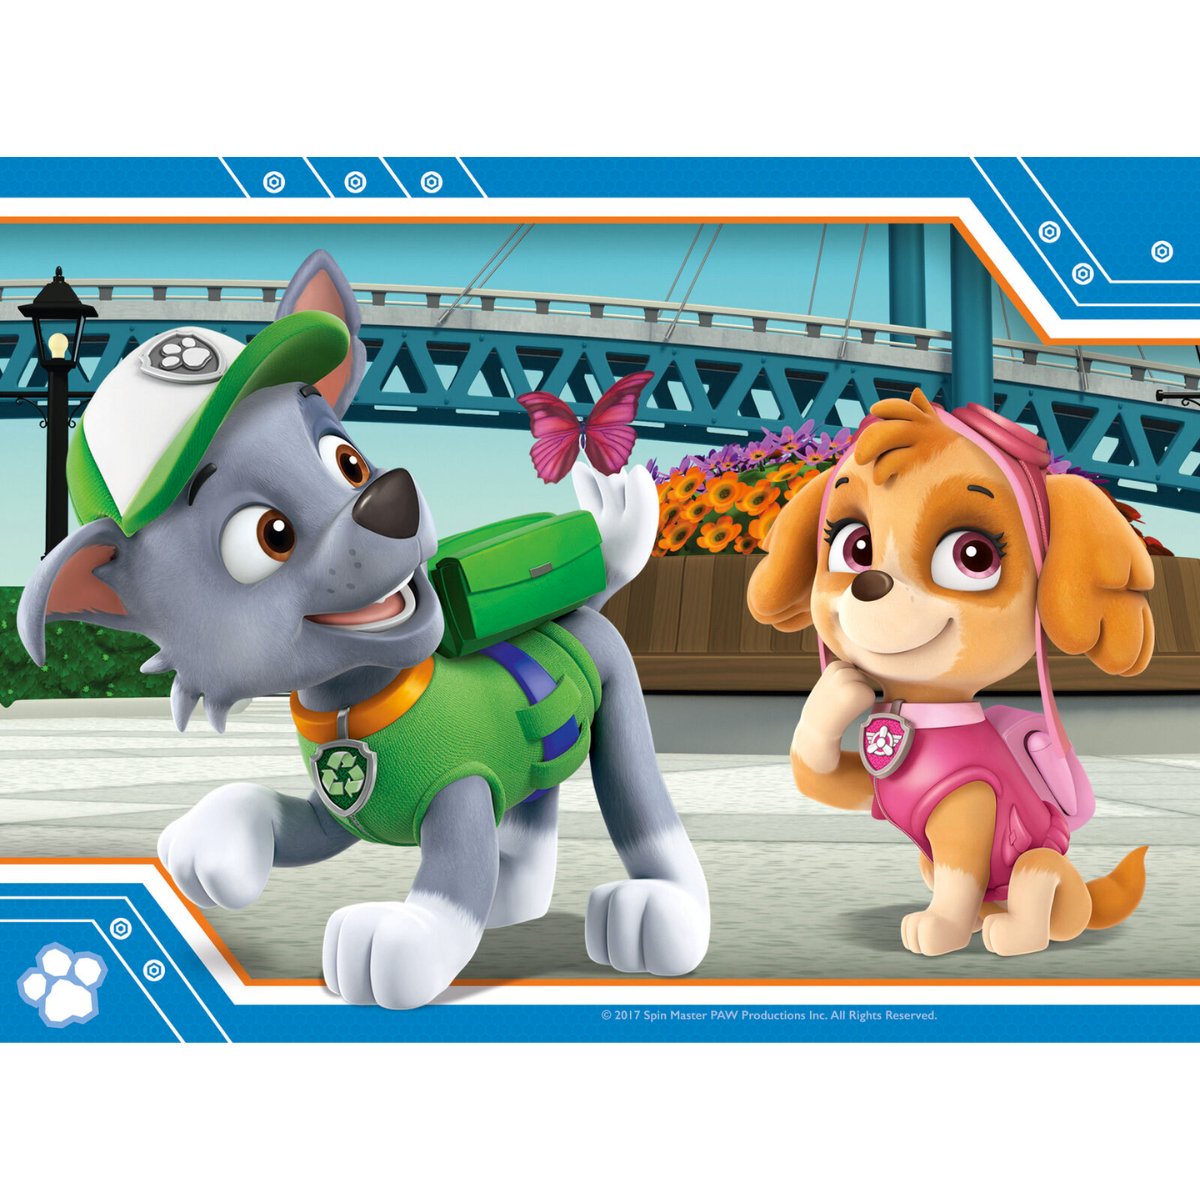 Ravensburger Paw Patrol Jigsaw Puzzle, 4 in a Box - Phillips Hobbies